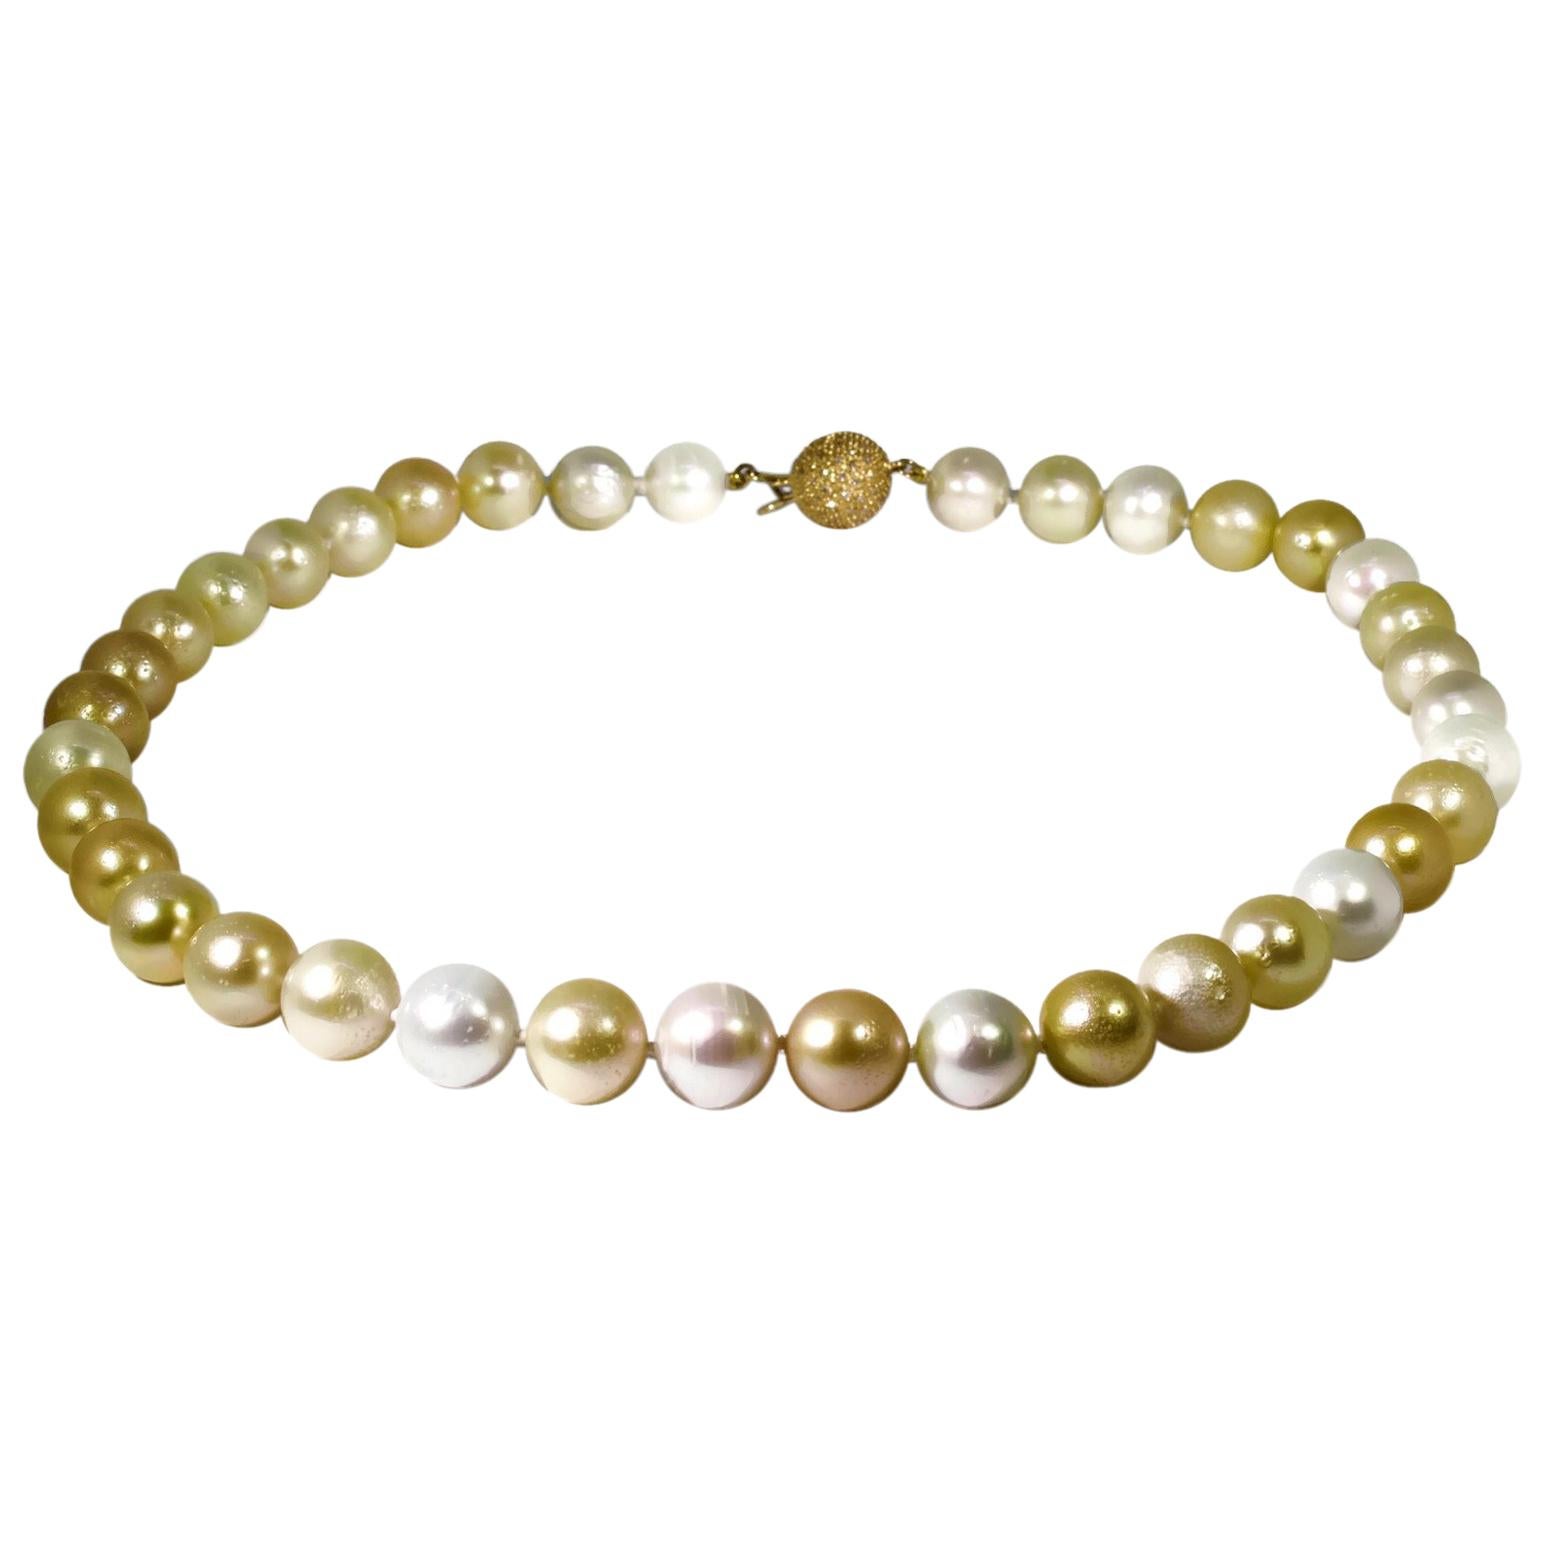 Golden and White South Sea Pearl Necklace with a 14 Karat Gold Diamond Clasp For Sale